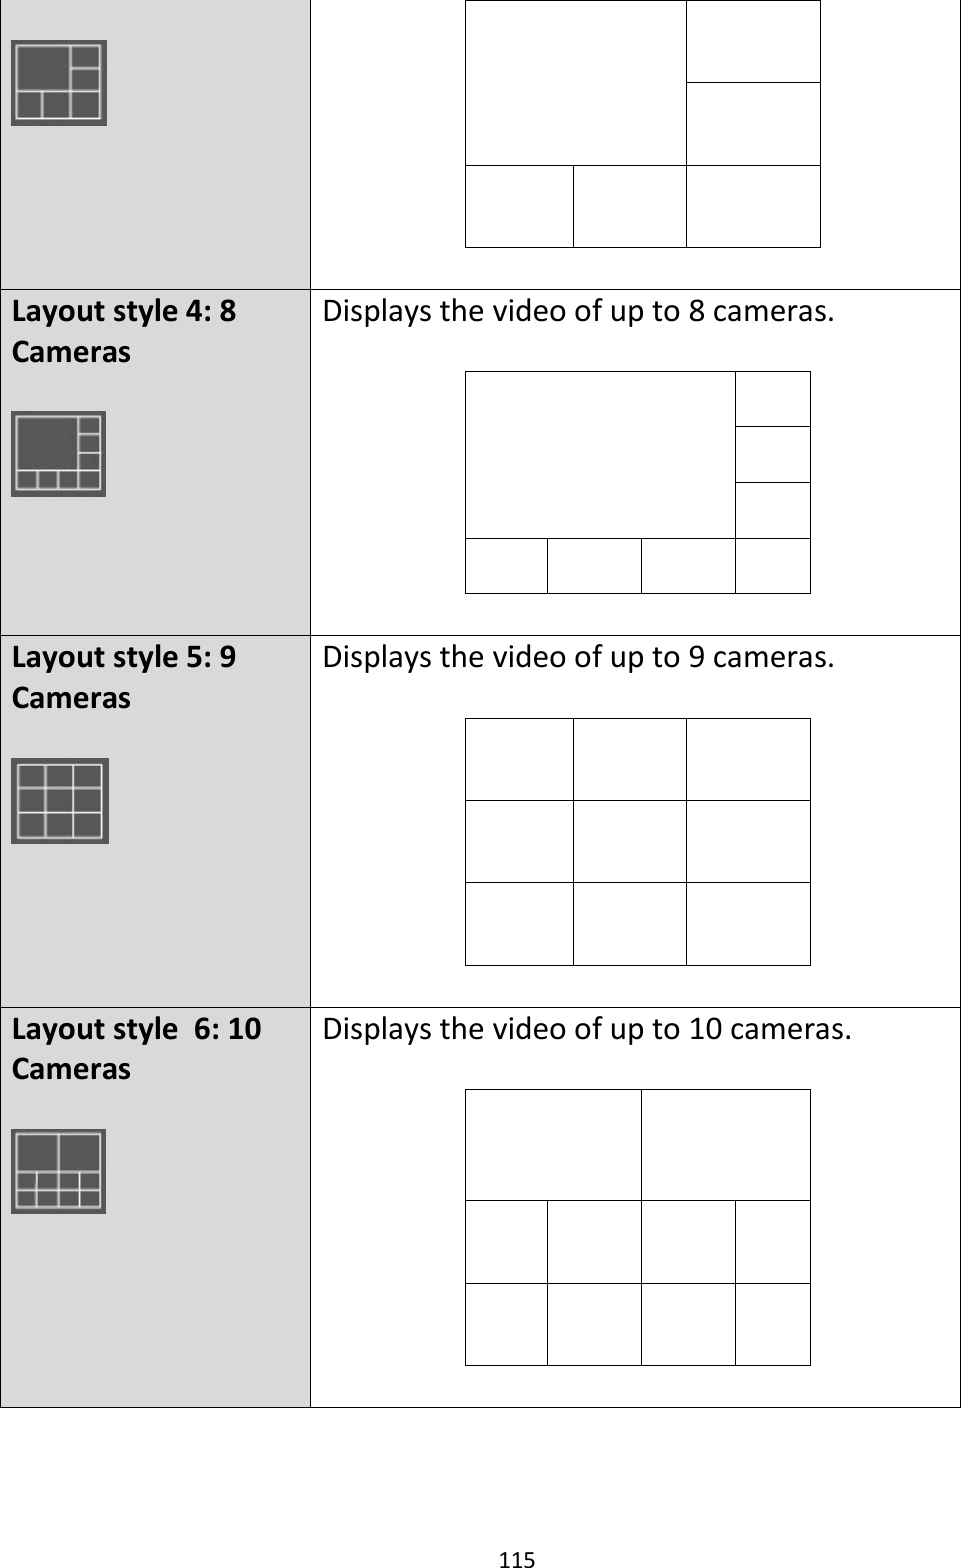 115                Layout style 4: 8 Cameras   Displays the video of up to 8 cameras.              Layout style 5: 9 Cameras   Displays the video of up to 9 cameras.                 Layout style  6: 10 Cameras   Displays the video of up to 10 cameras.                    